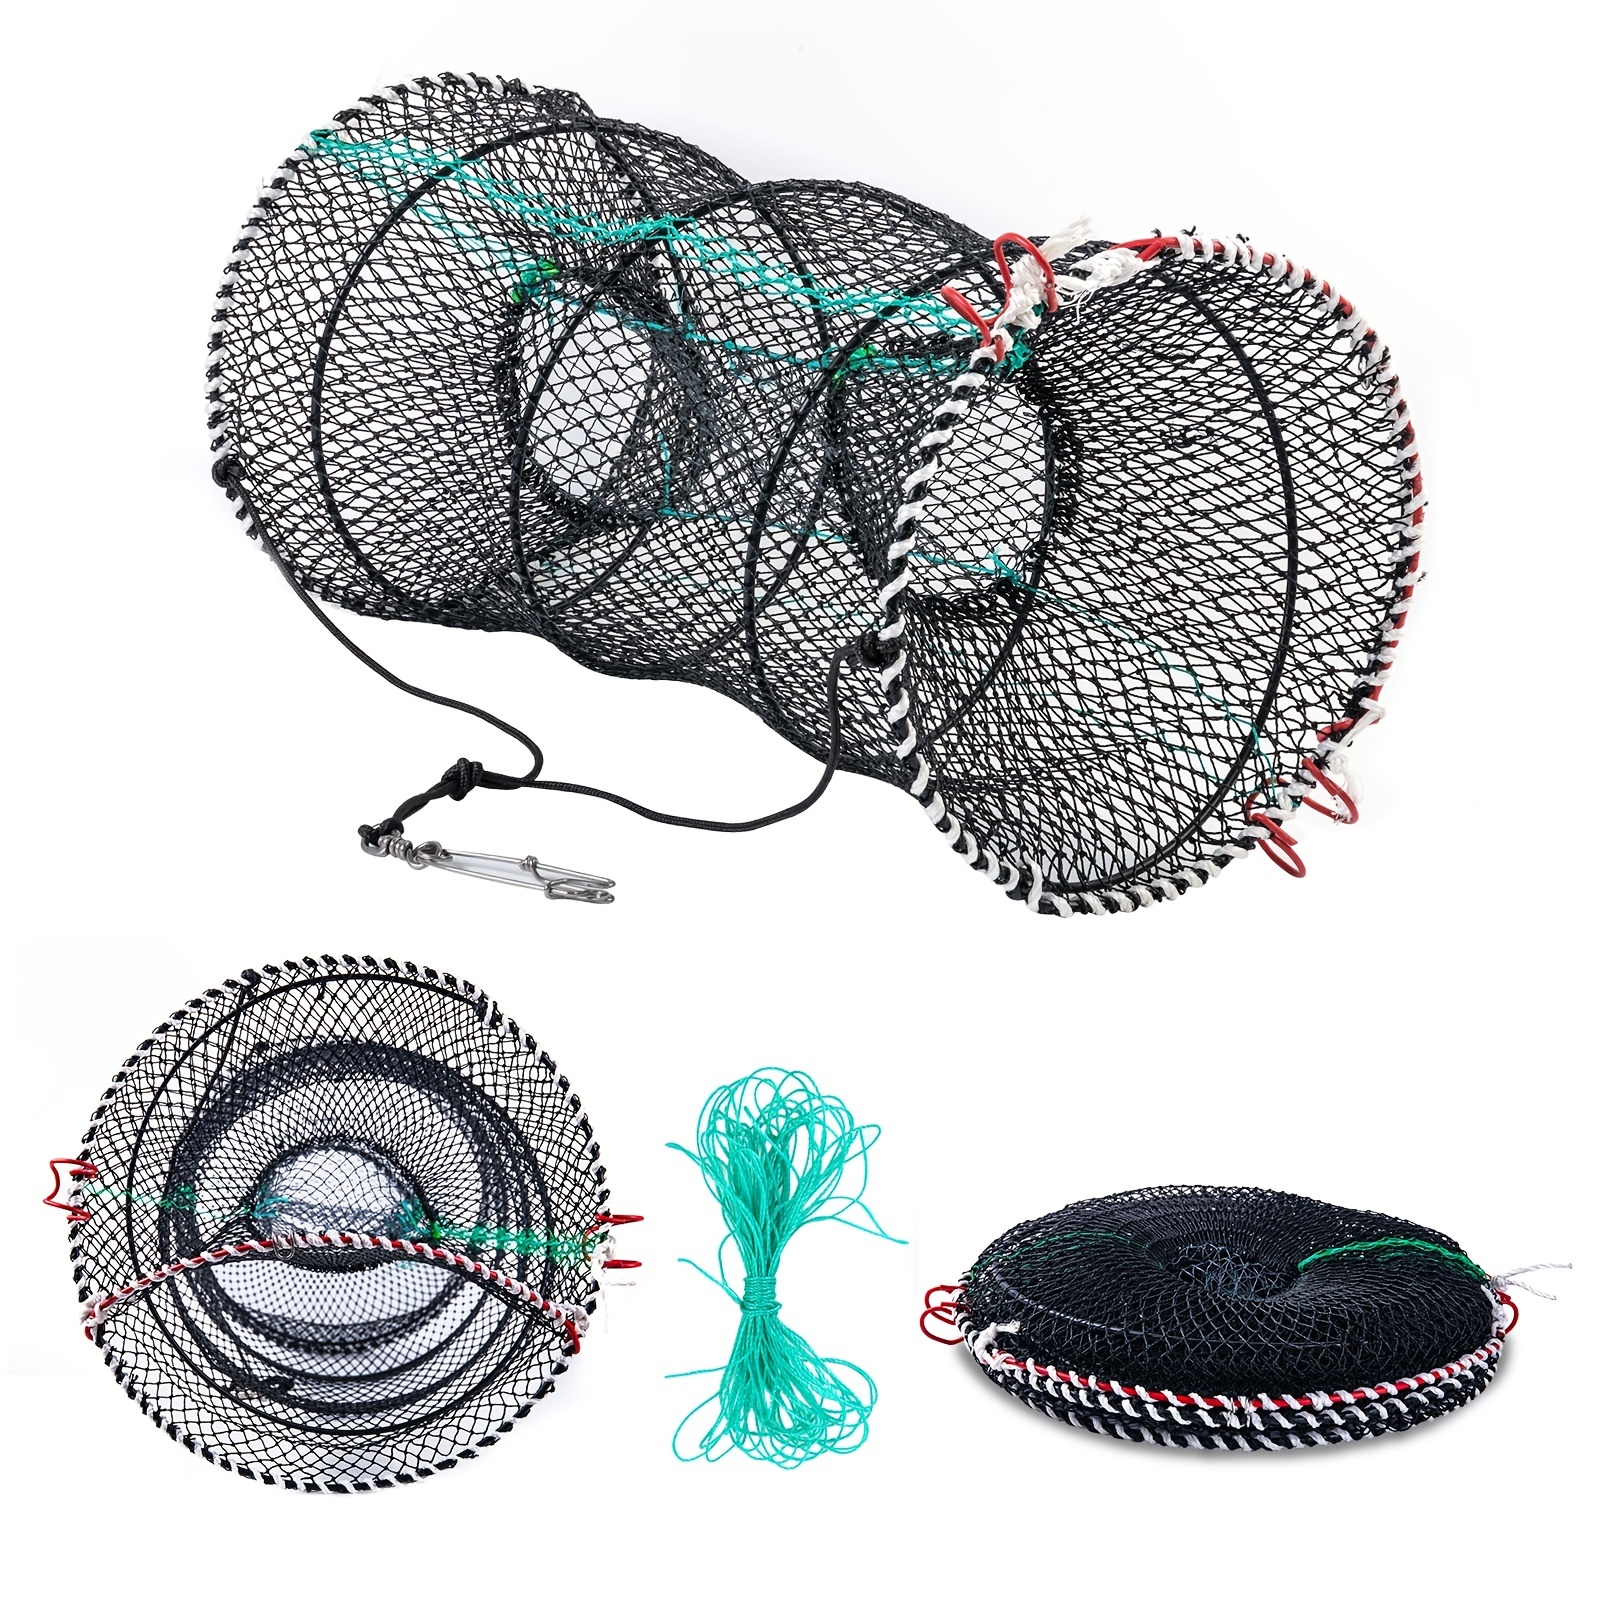  4 Pack Fishing Bait Trap Crab Trap Minnow Trap Crawfish Trap  Lobster Trap Crayfish Shrimp Trap Net Portable Collapsible Fishing Traps  with 49 Ft Rope Folded Fishing Accessories, 12 x